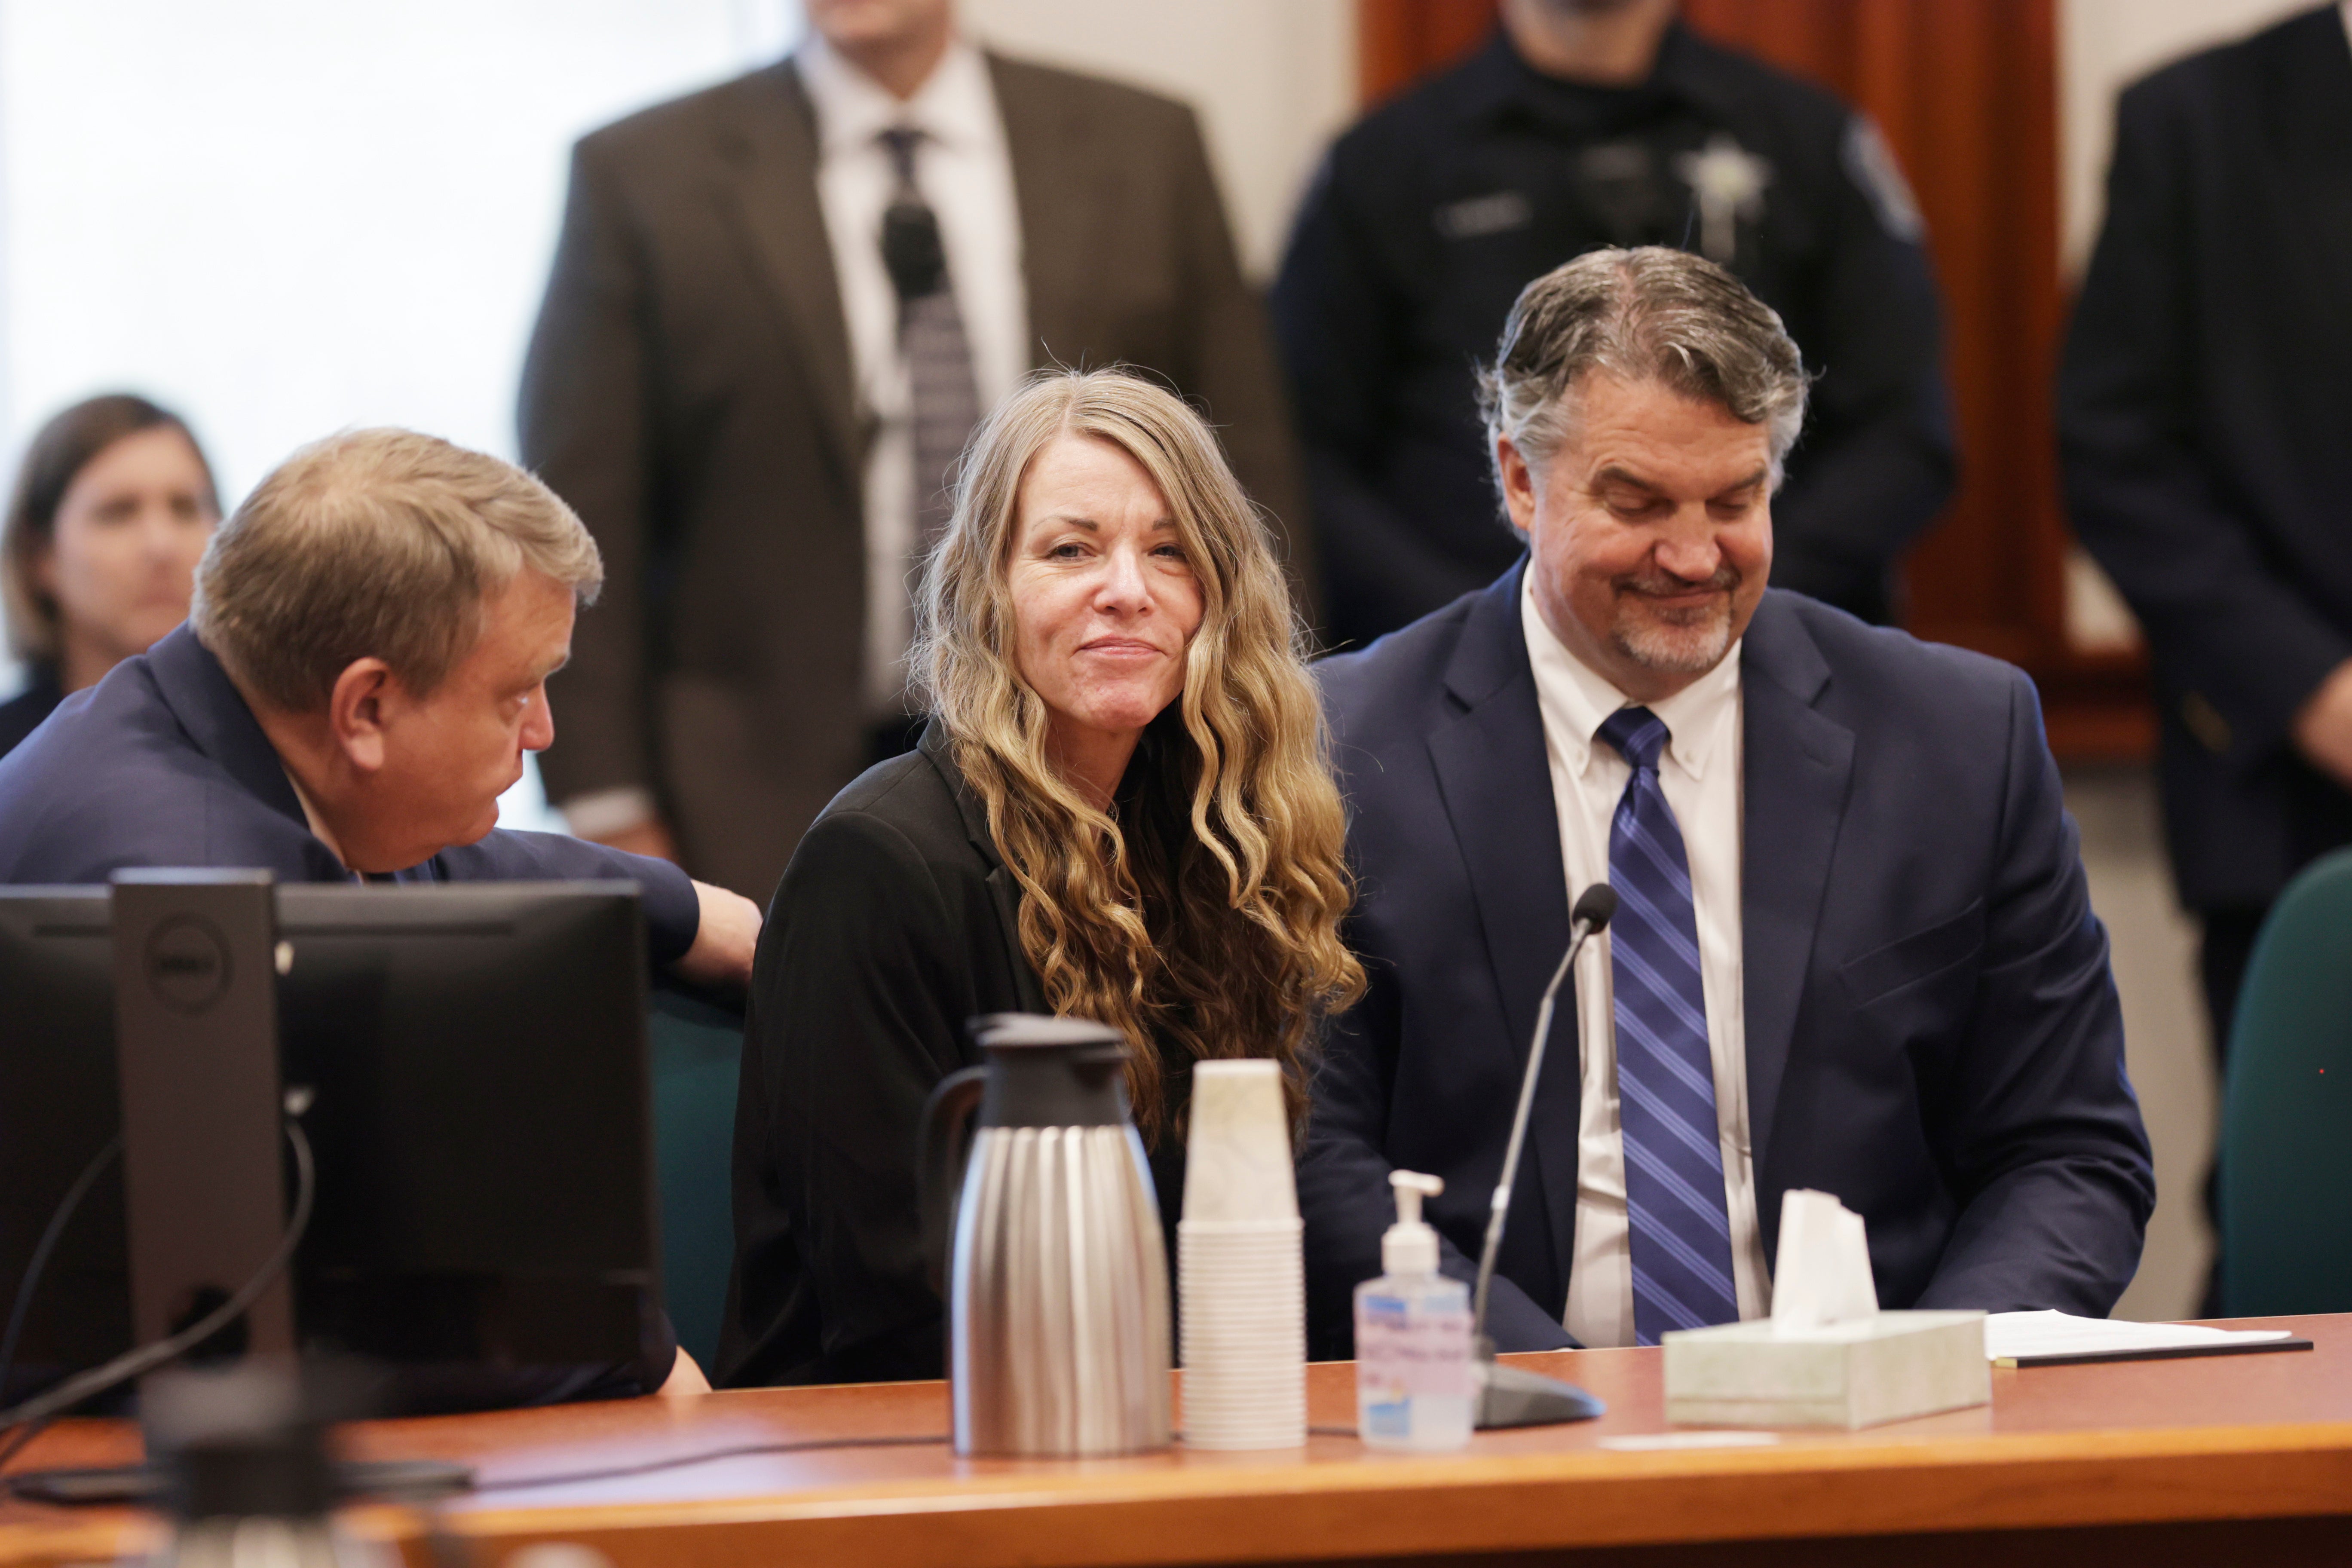 Lori Vallow talks with her lawyers before the jury’s verdict is read at her murder trial